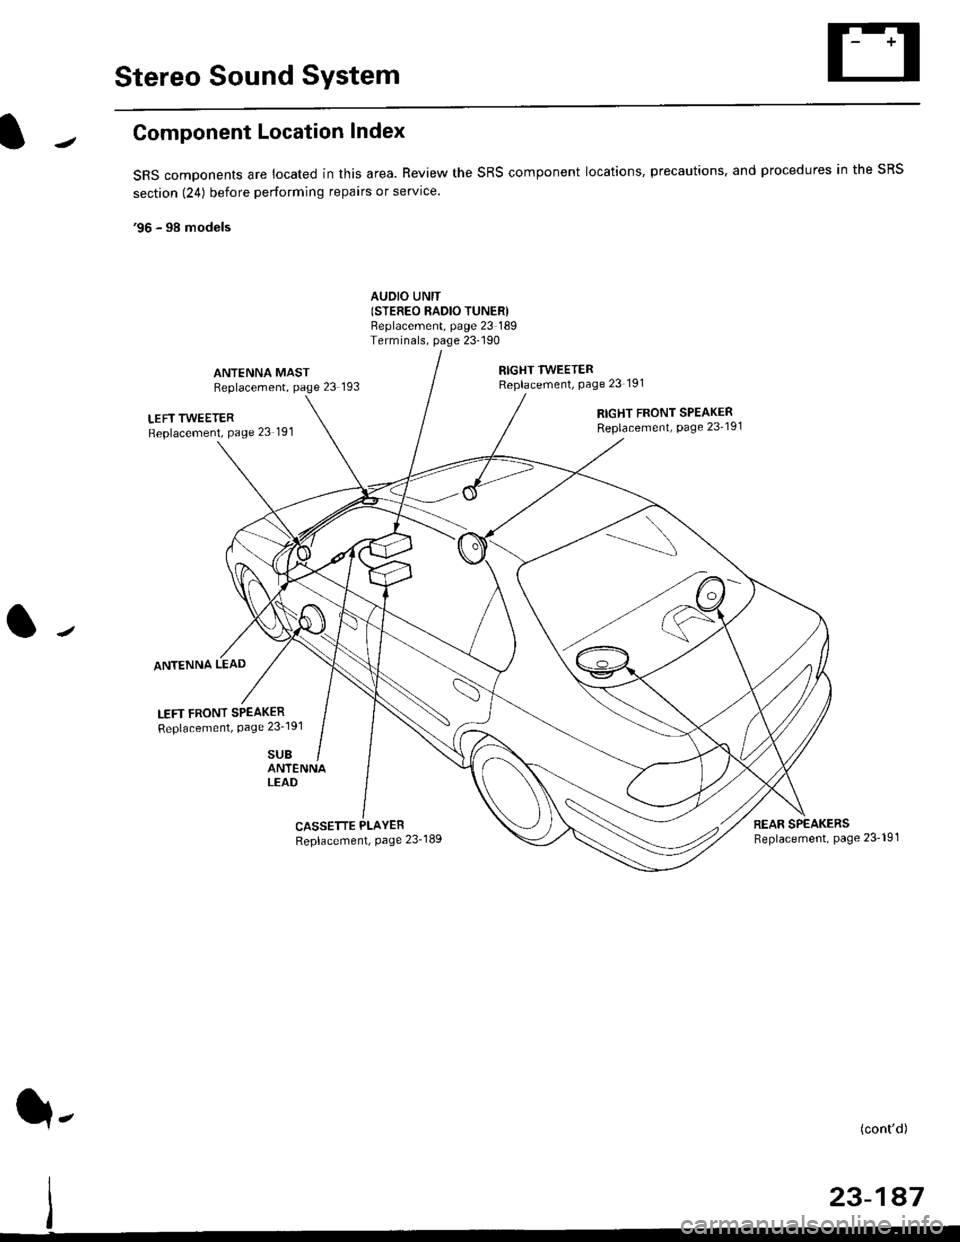 HONDA CIVIC 1996 6.G Workshop Manual Stereo Sound System
Component Location Index
SRS components are located in this area. Review the SRS component locations, precautions. and procedures in the SRS
section (24) before performing repairs 